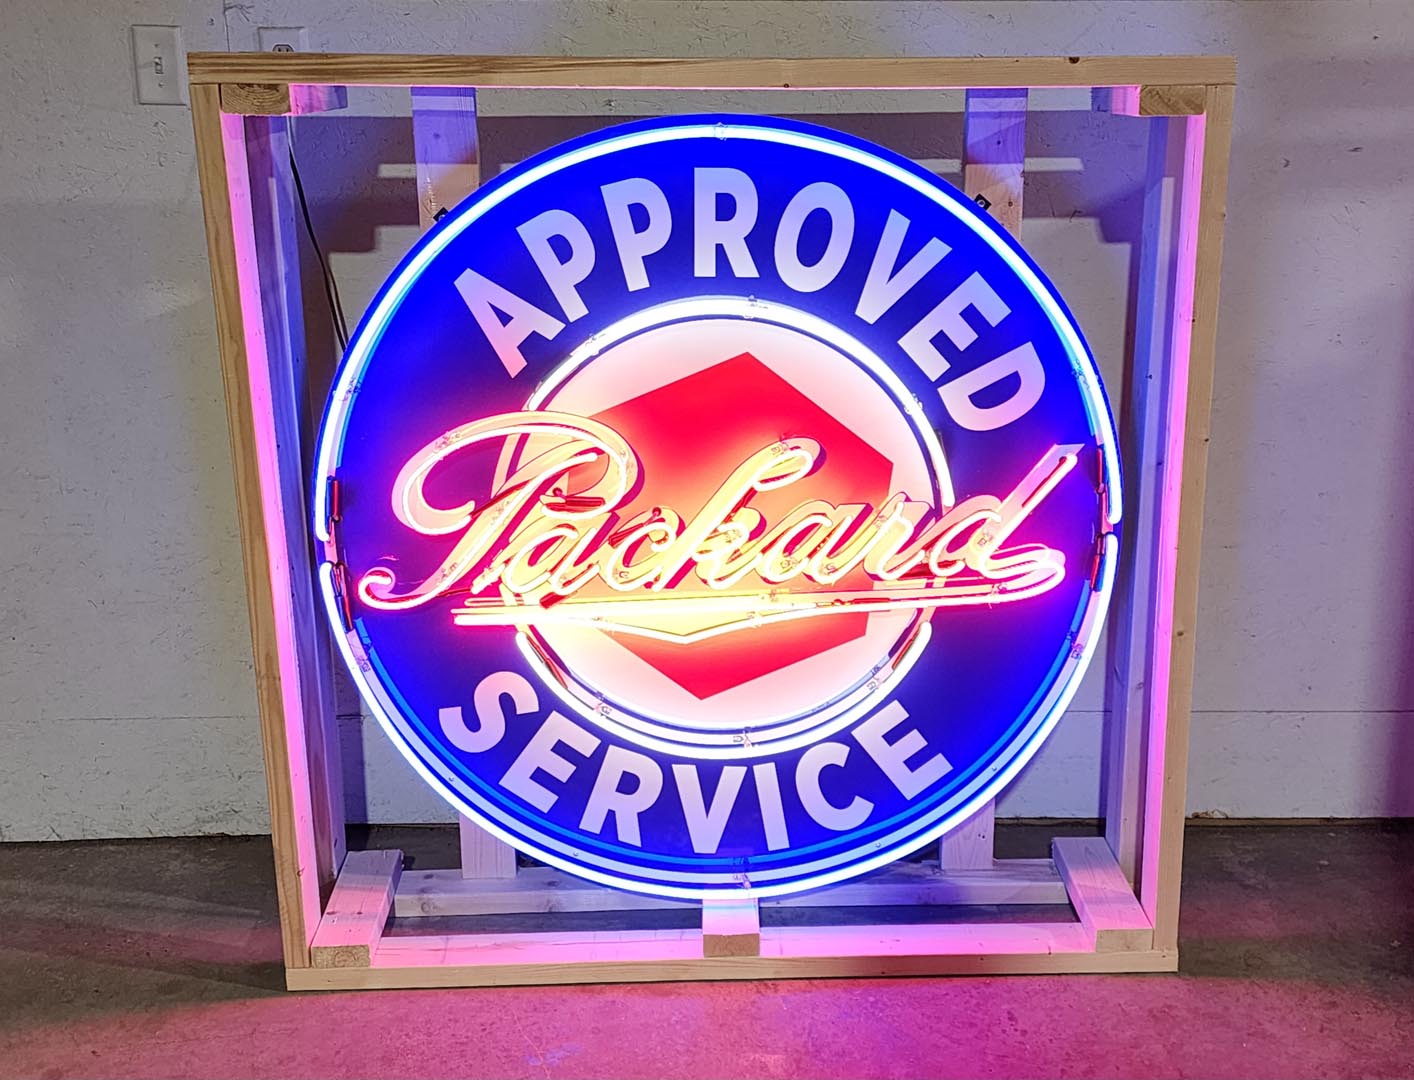  Custom Packard Approved Servic e Neon Lighted Sign 